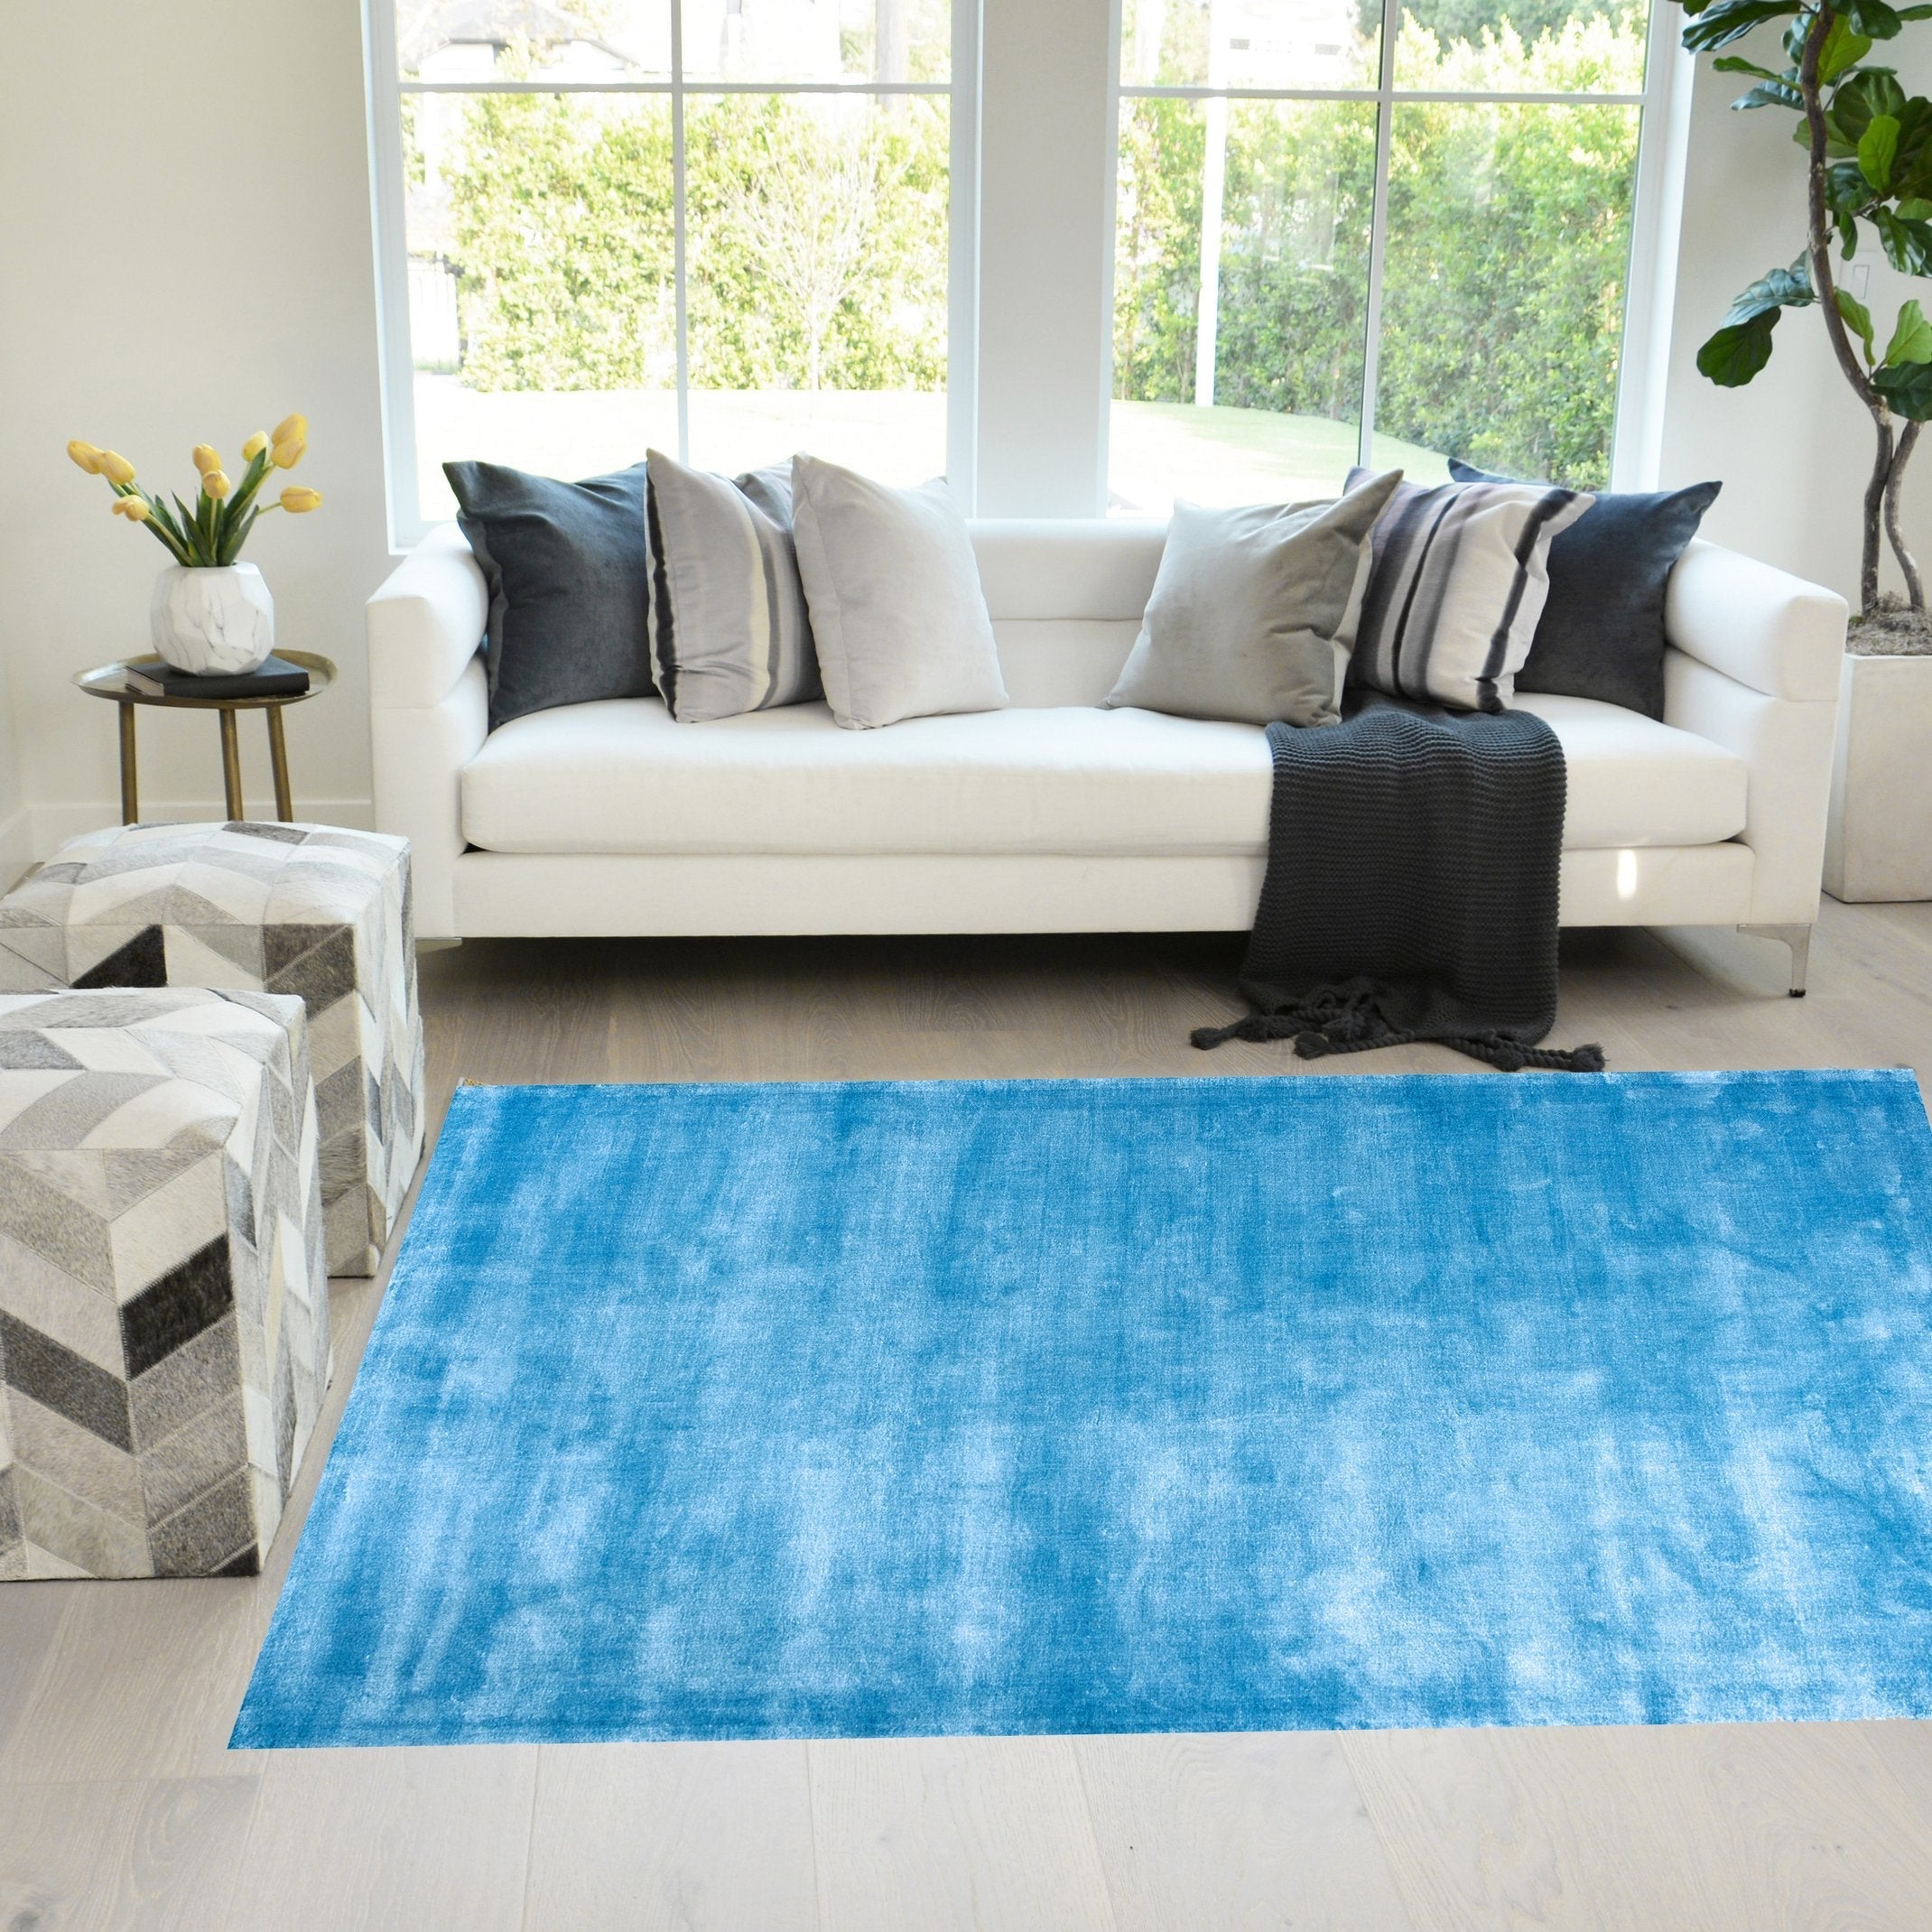 Sky Blu Color Rugs Tencel Ultra-Soft Hand Knotted in India 5' X 8' Rugs for Dining Room